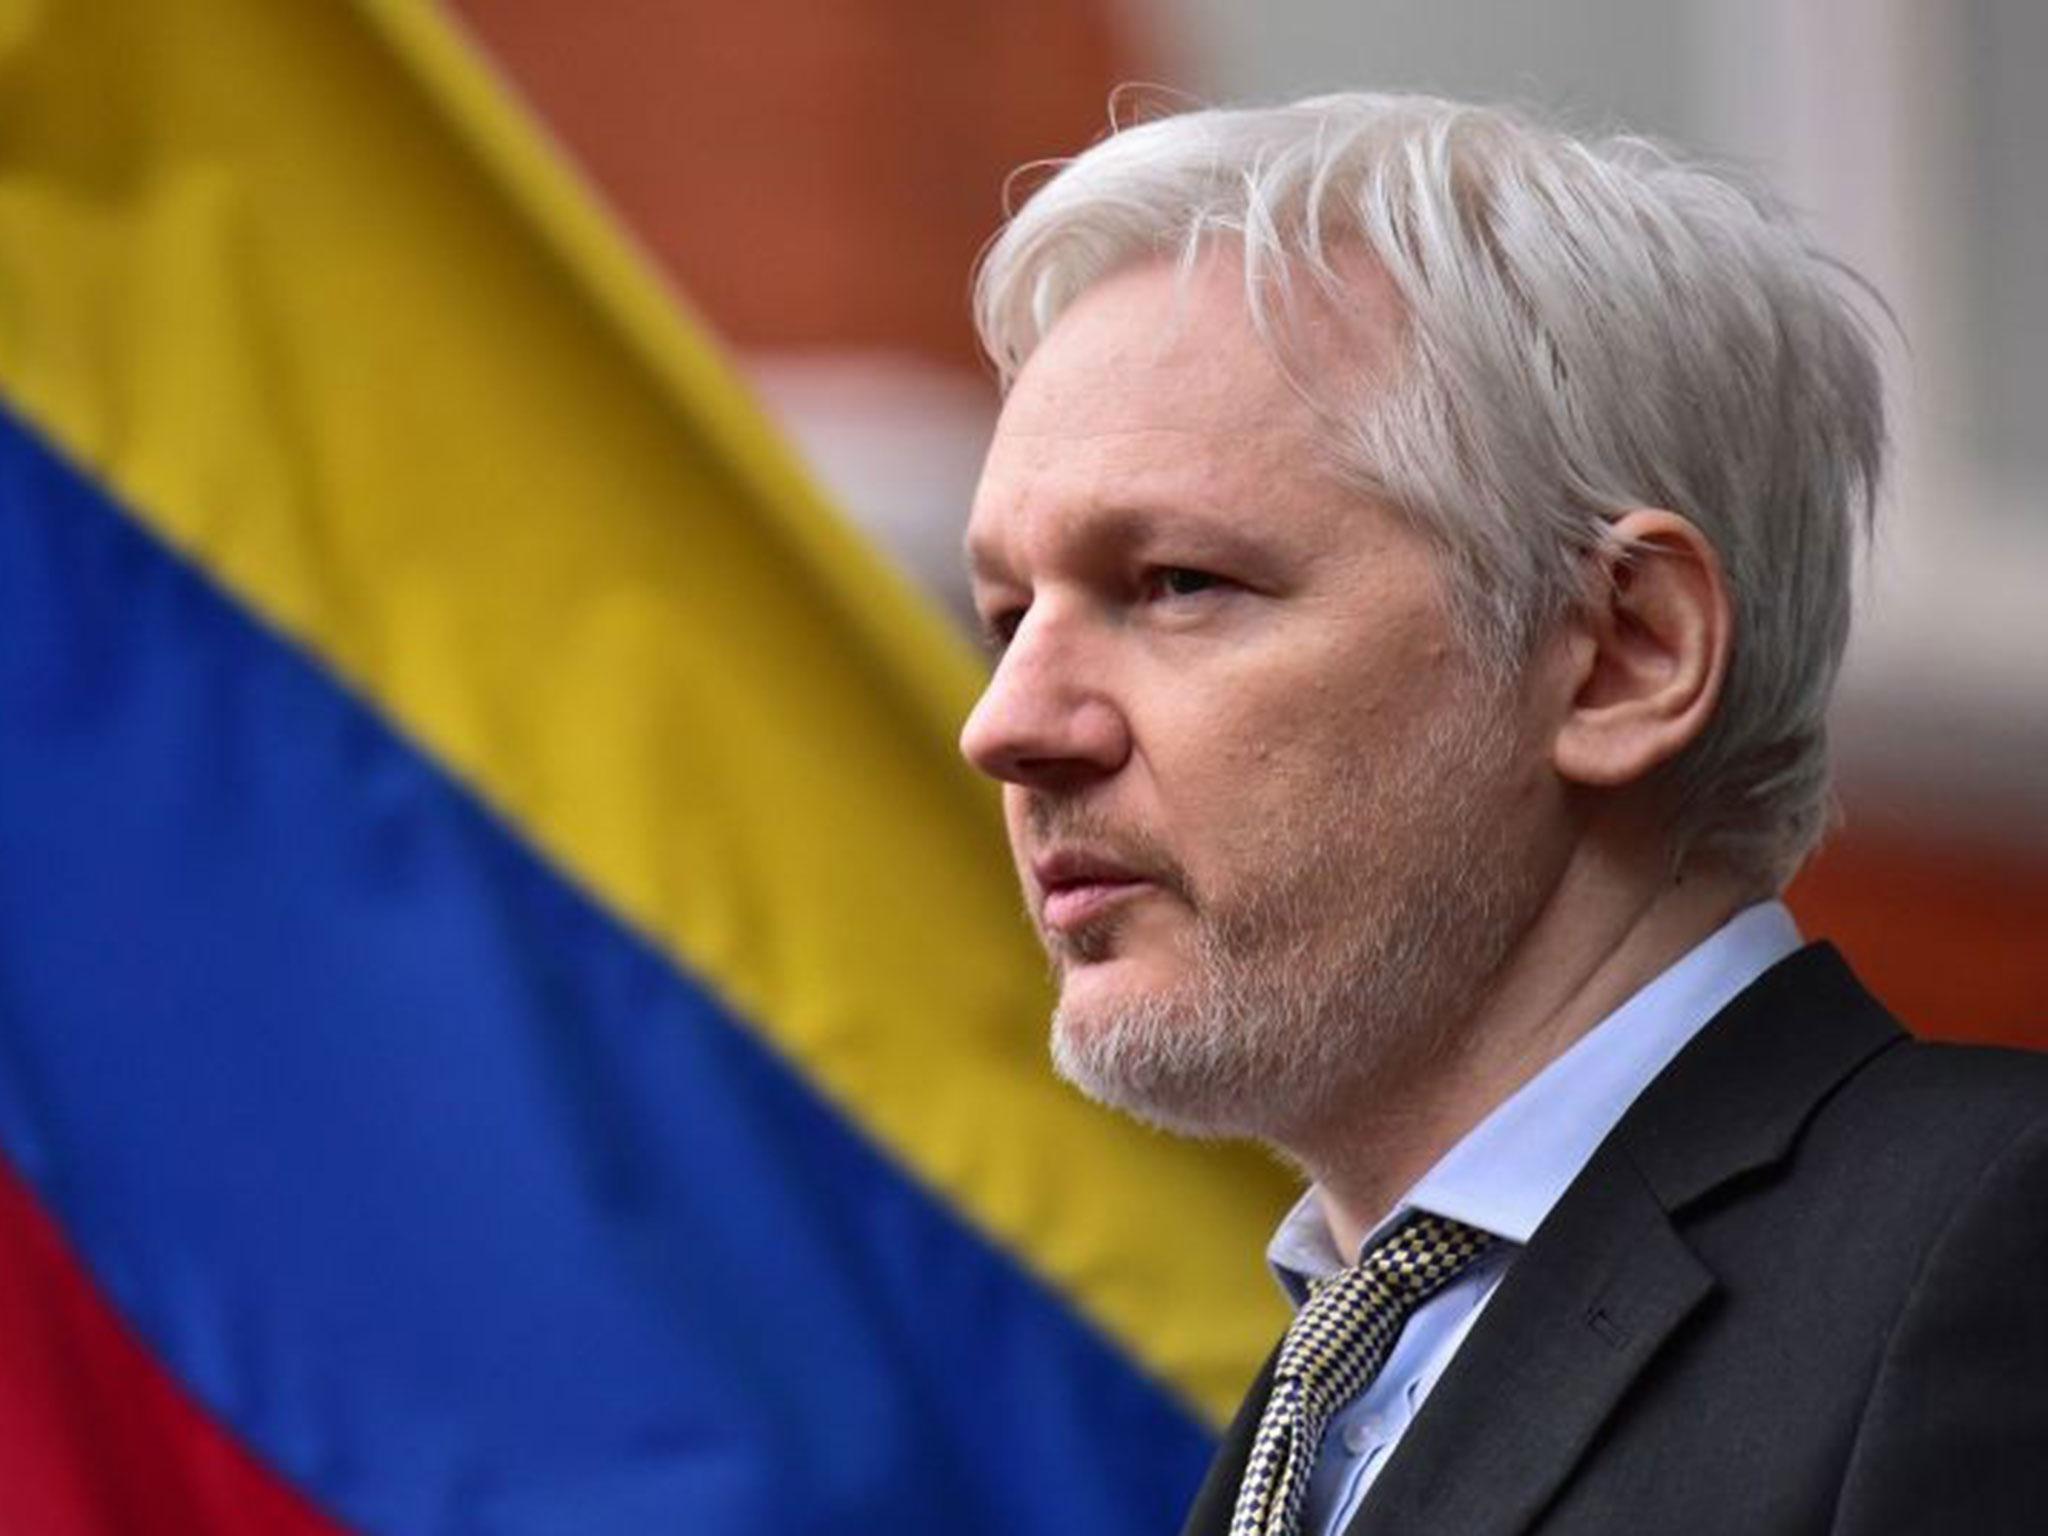 The Australian has said he is willing to leave the Ecuadorian embassy if a deal can be done with the US Department of Justice